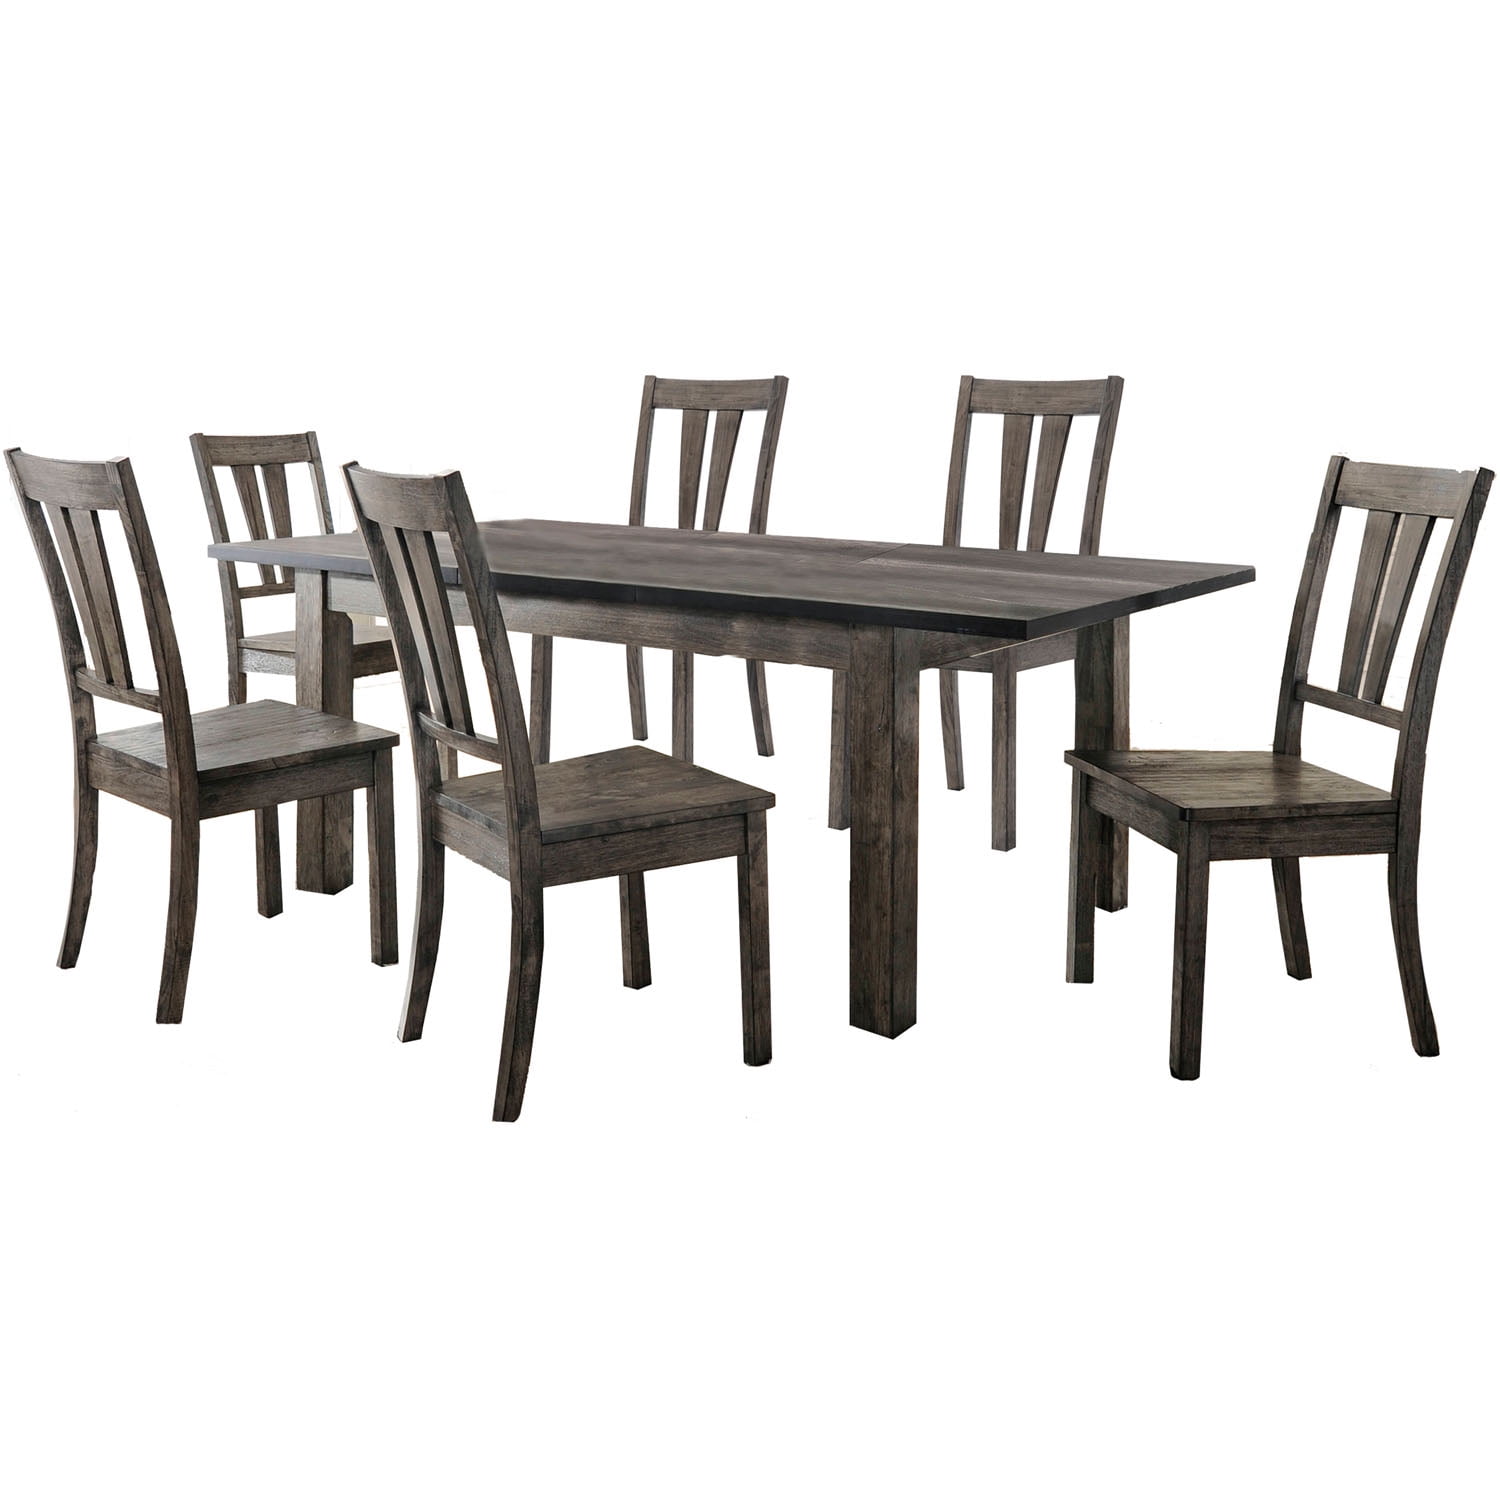 99001-wd7pc1-wg 30 X 78 X 42 In. Drexel Dining Table With 6 Wood Side Chairs, 6 Piece